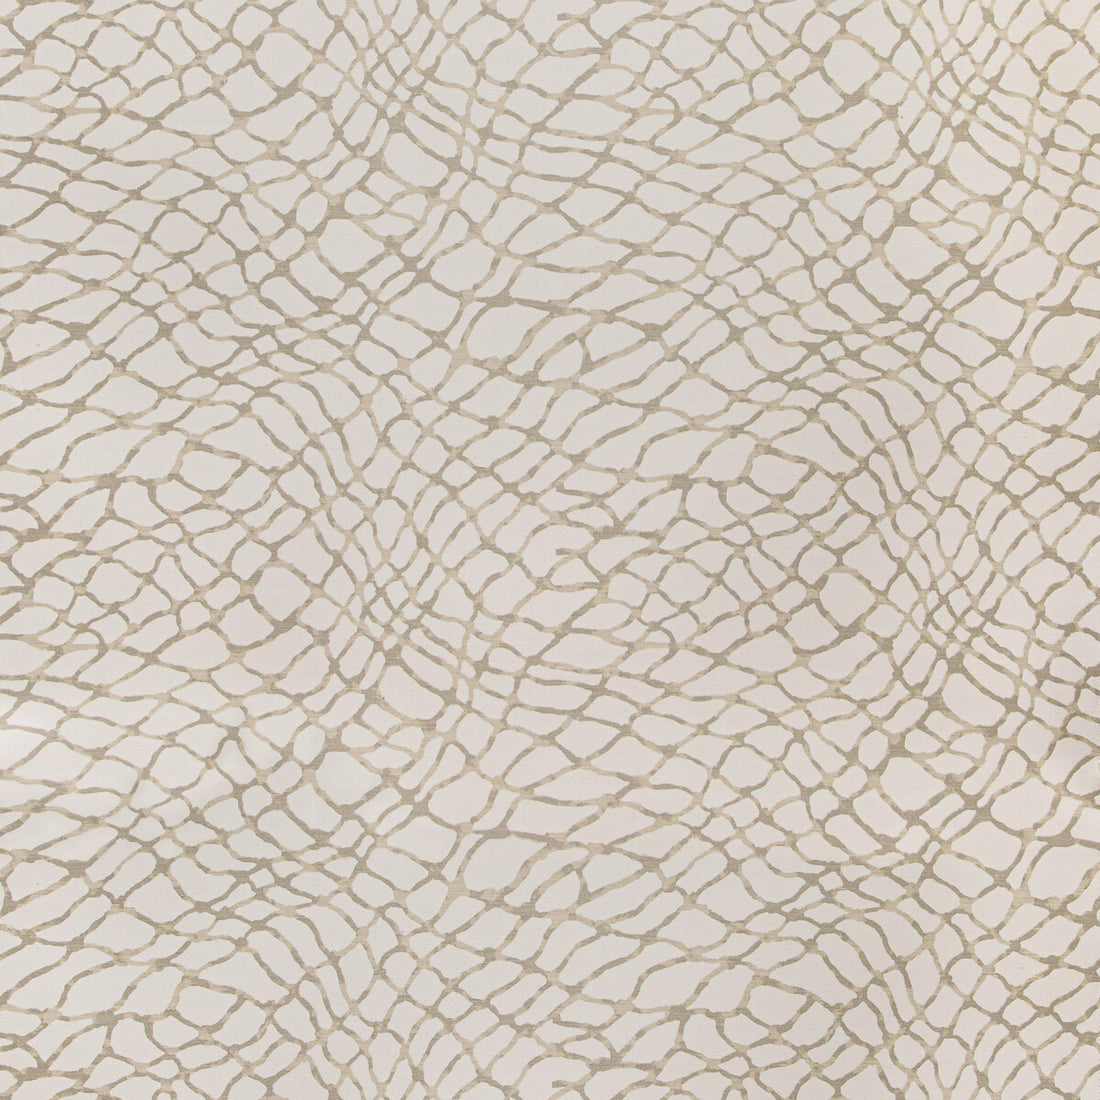 Hawser fabric in dune color - pattern 35819.16.0 - by Kravet Design in the Indoor / Outdoor collection